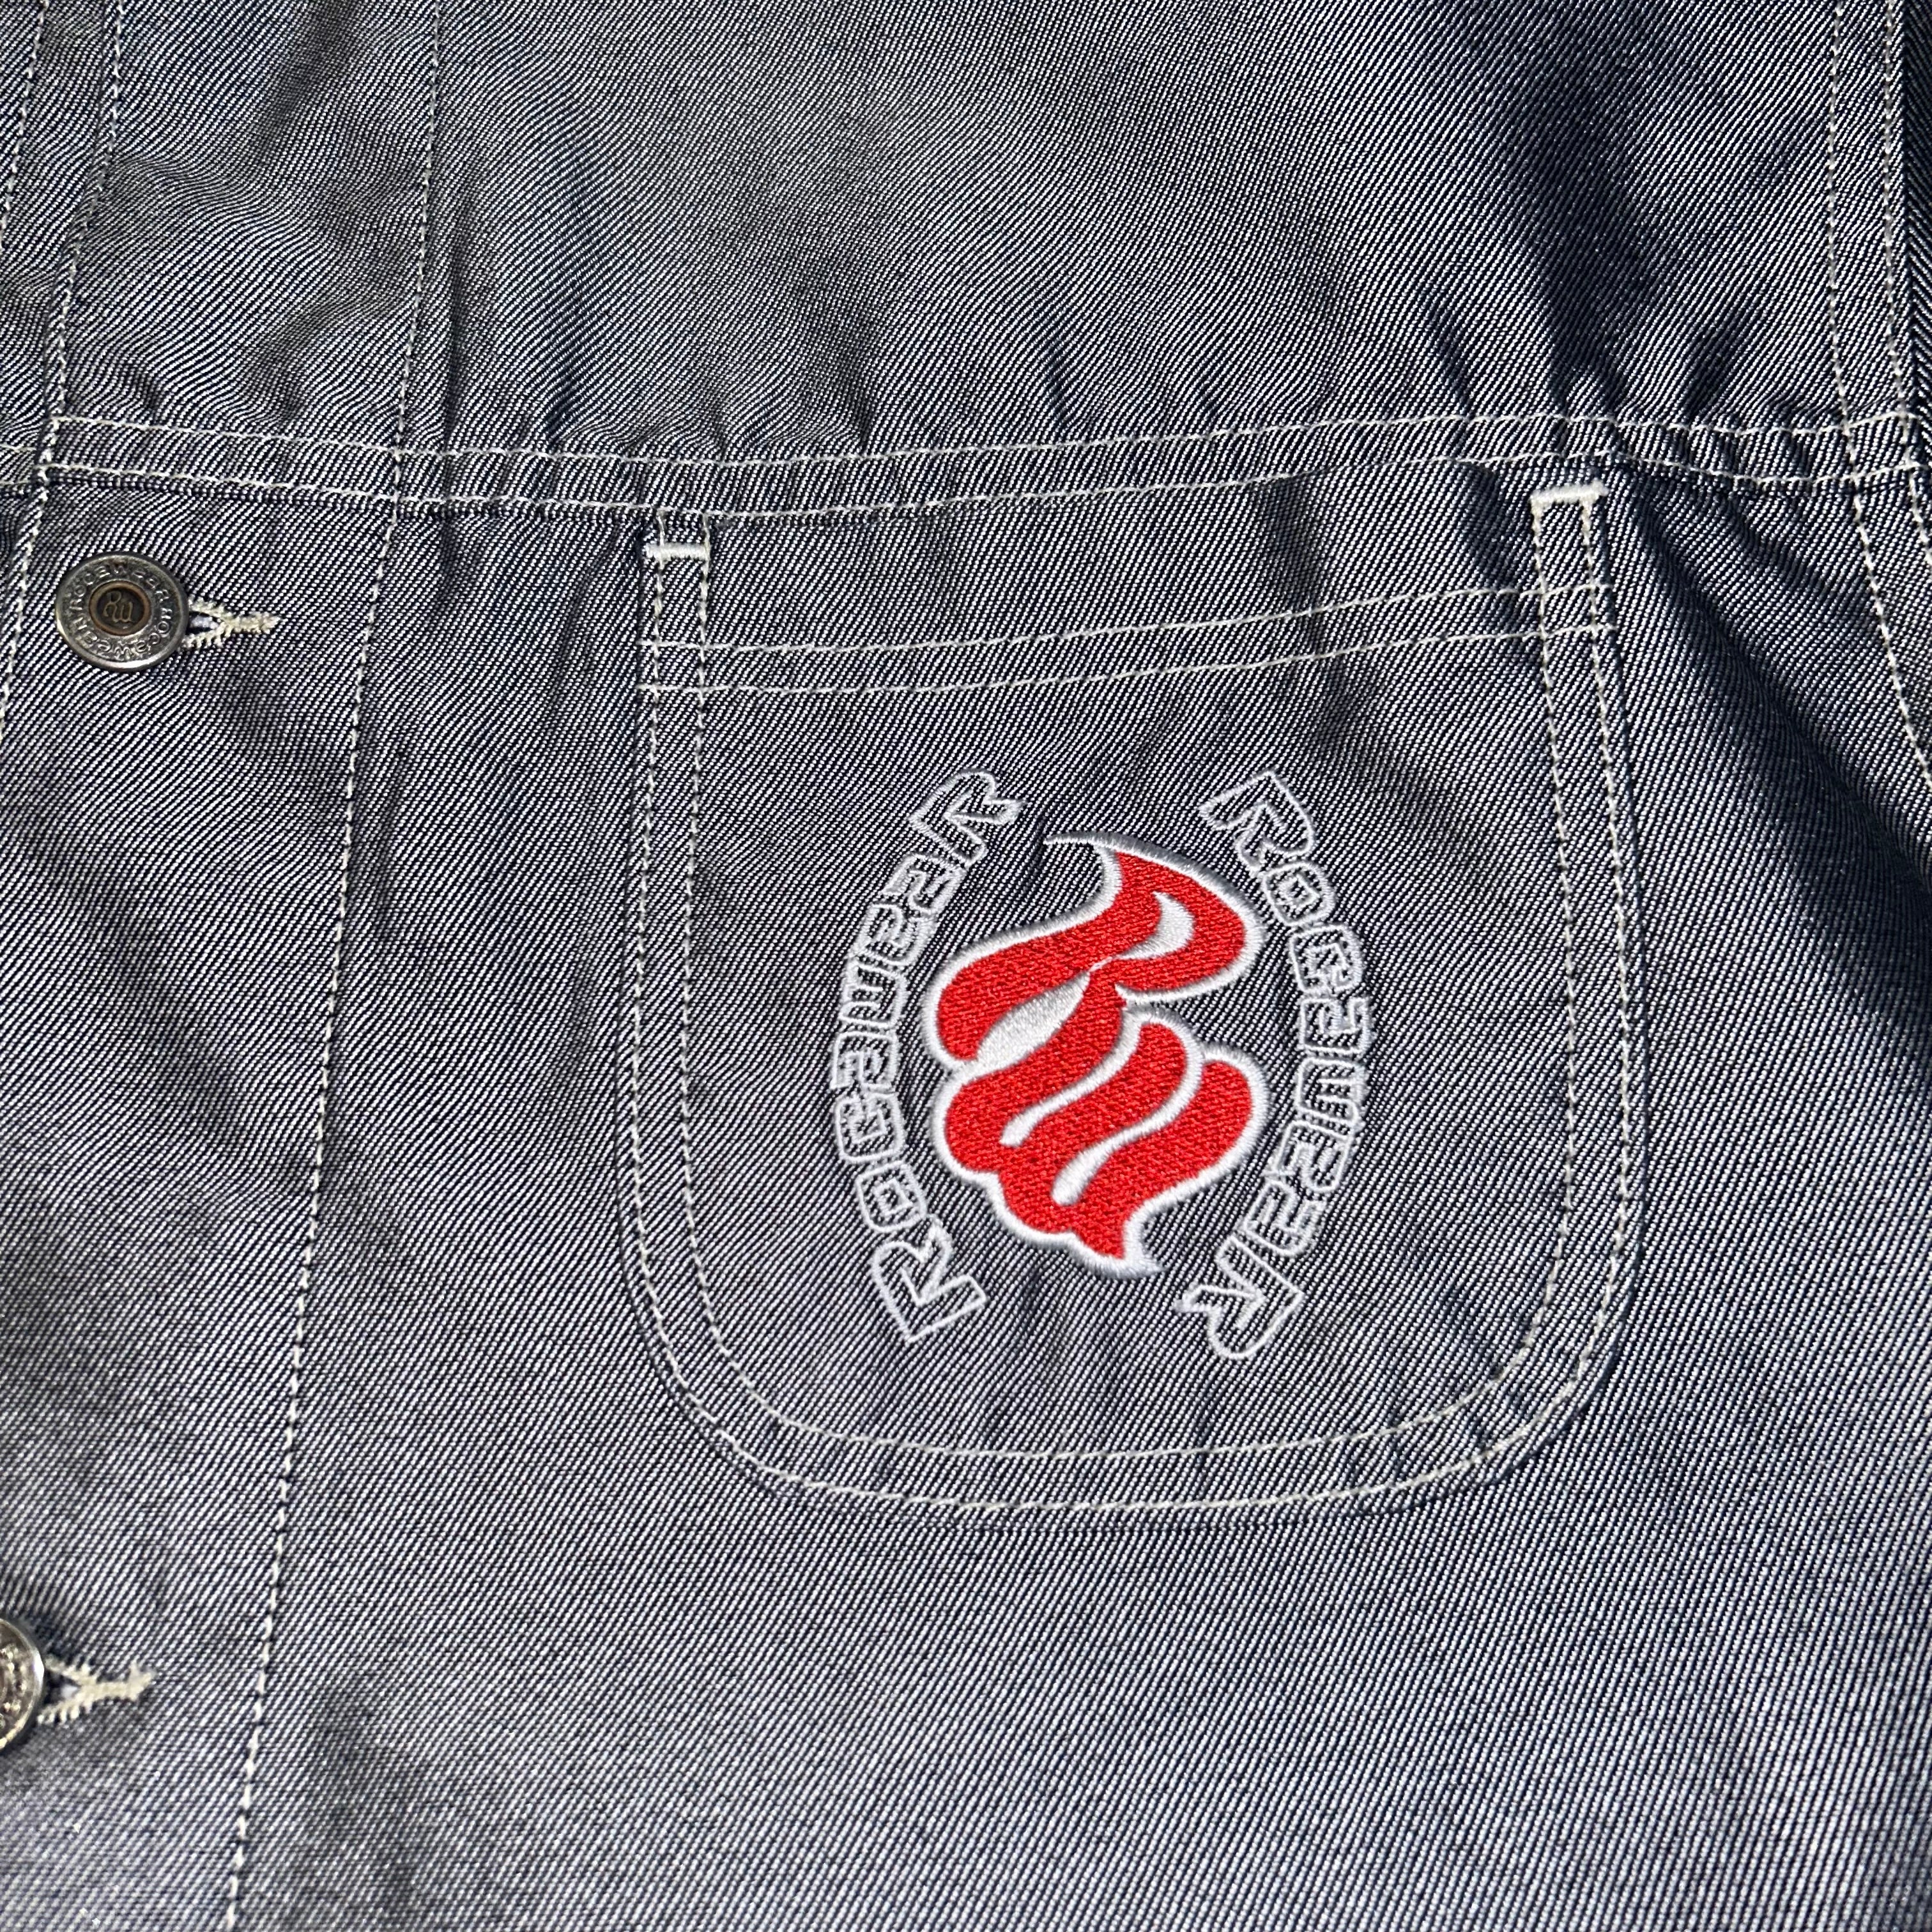 Giacca in jeans Rocawear vintage shiny (XL) - oldstyleclothing